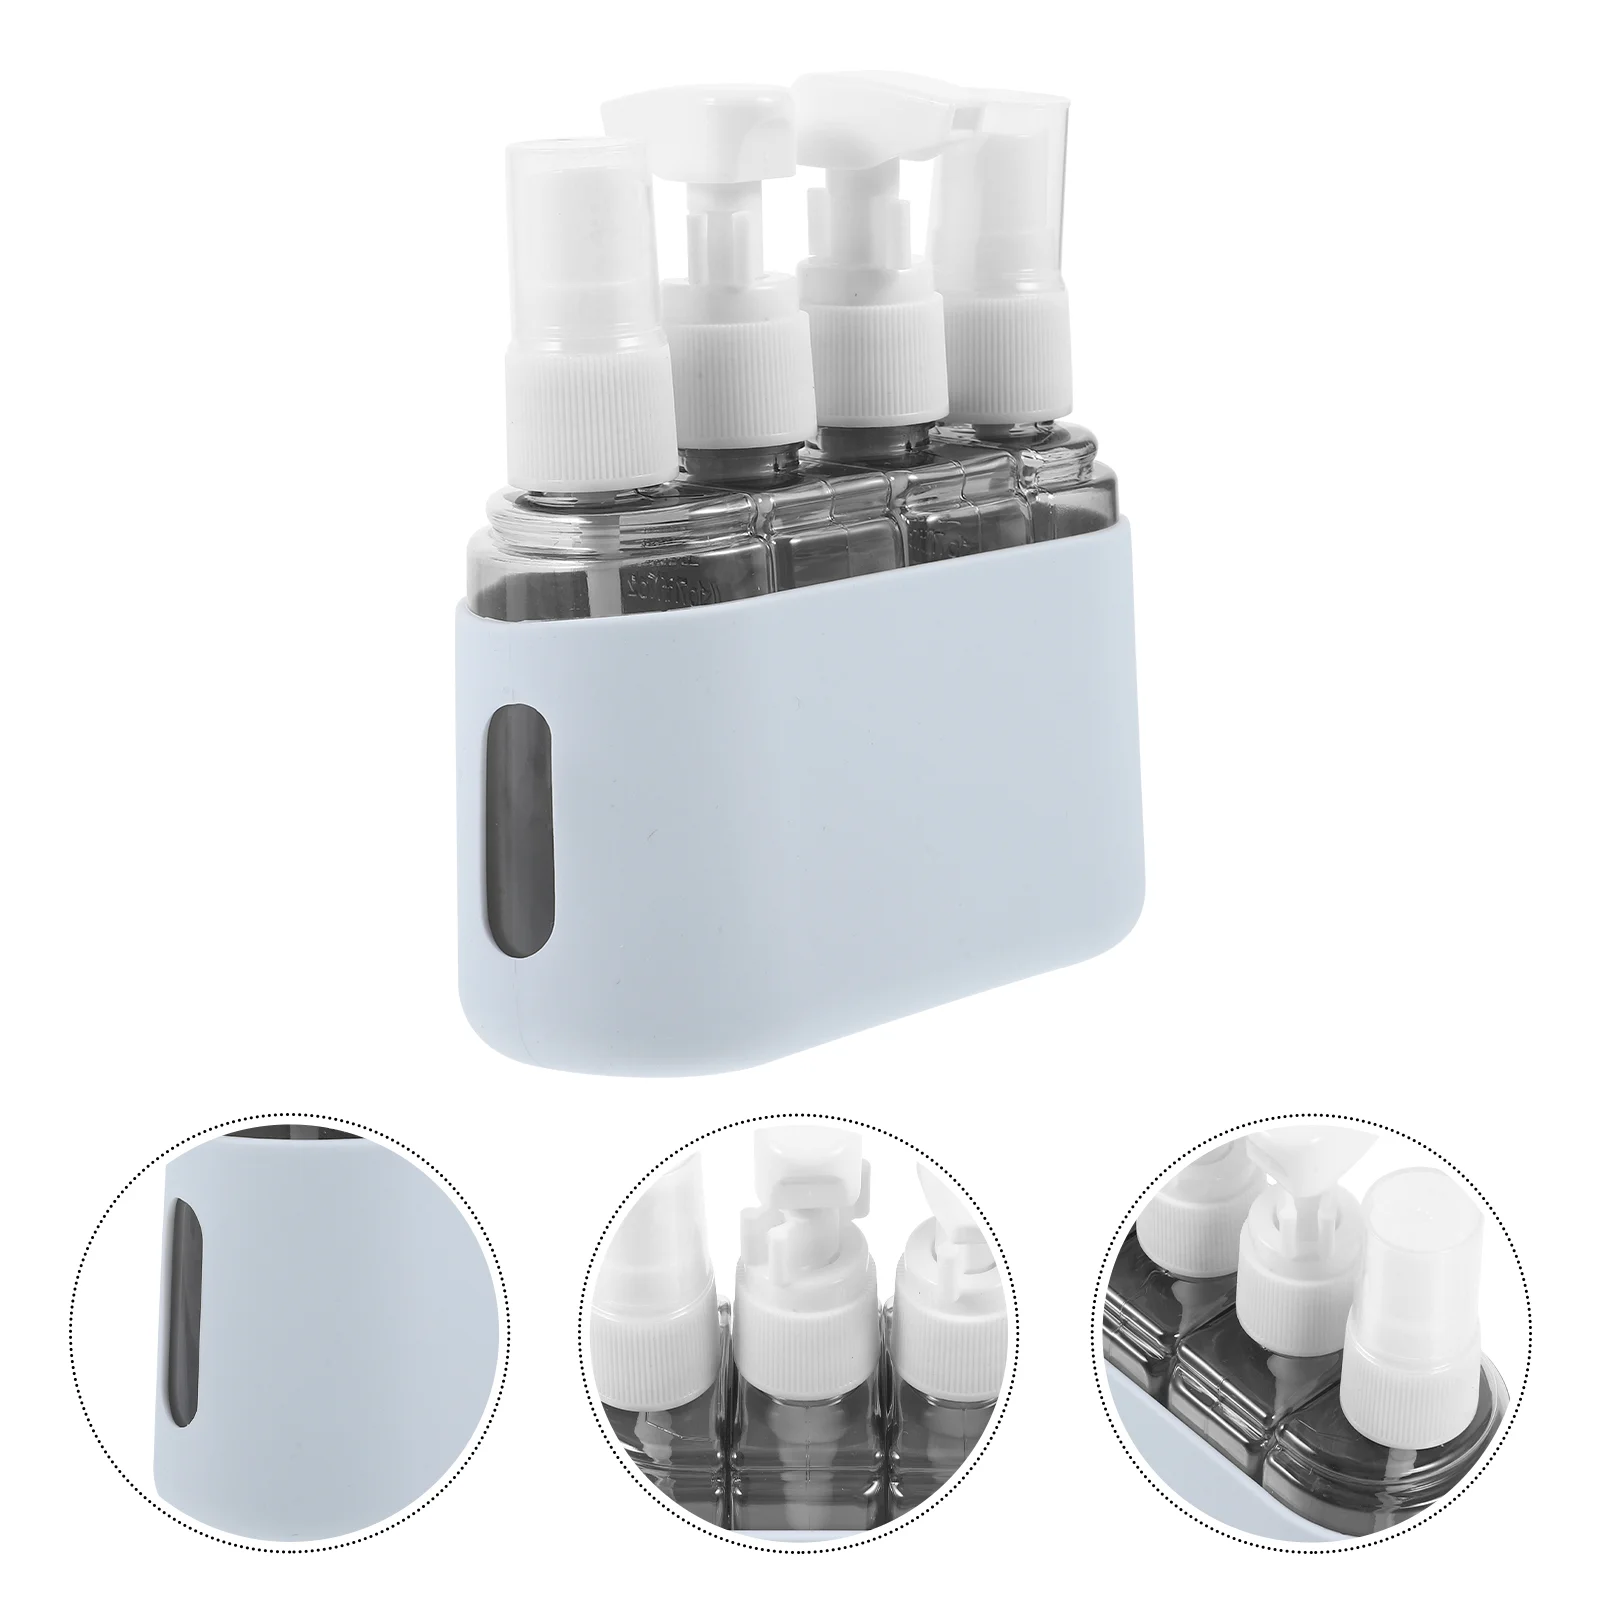 

Portable Moisturizing Spray Bottle Travel Shampoo Bottles and Conditioner Container Containers for Toiletries Toiletry